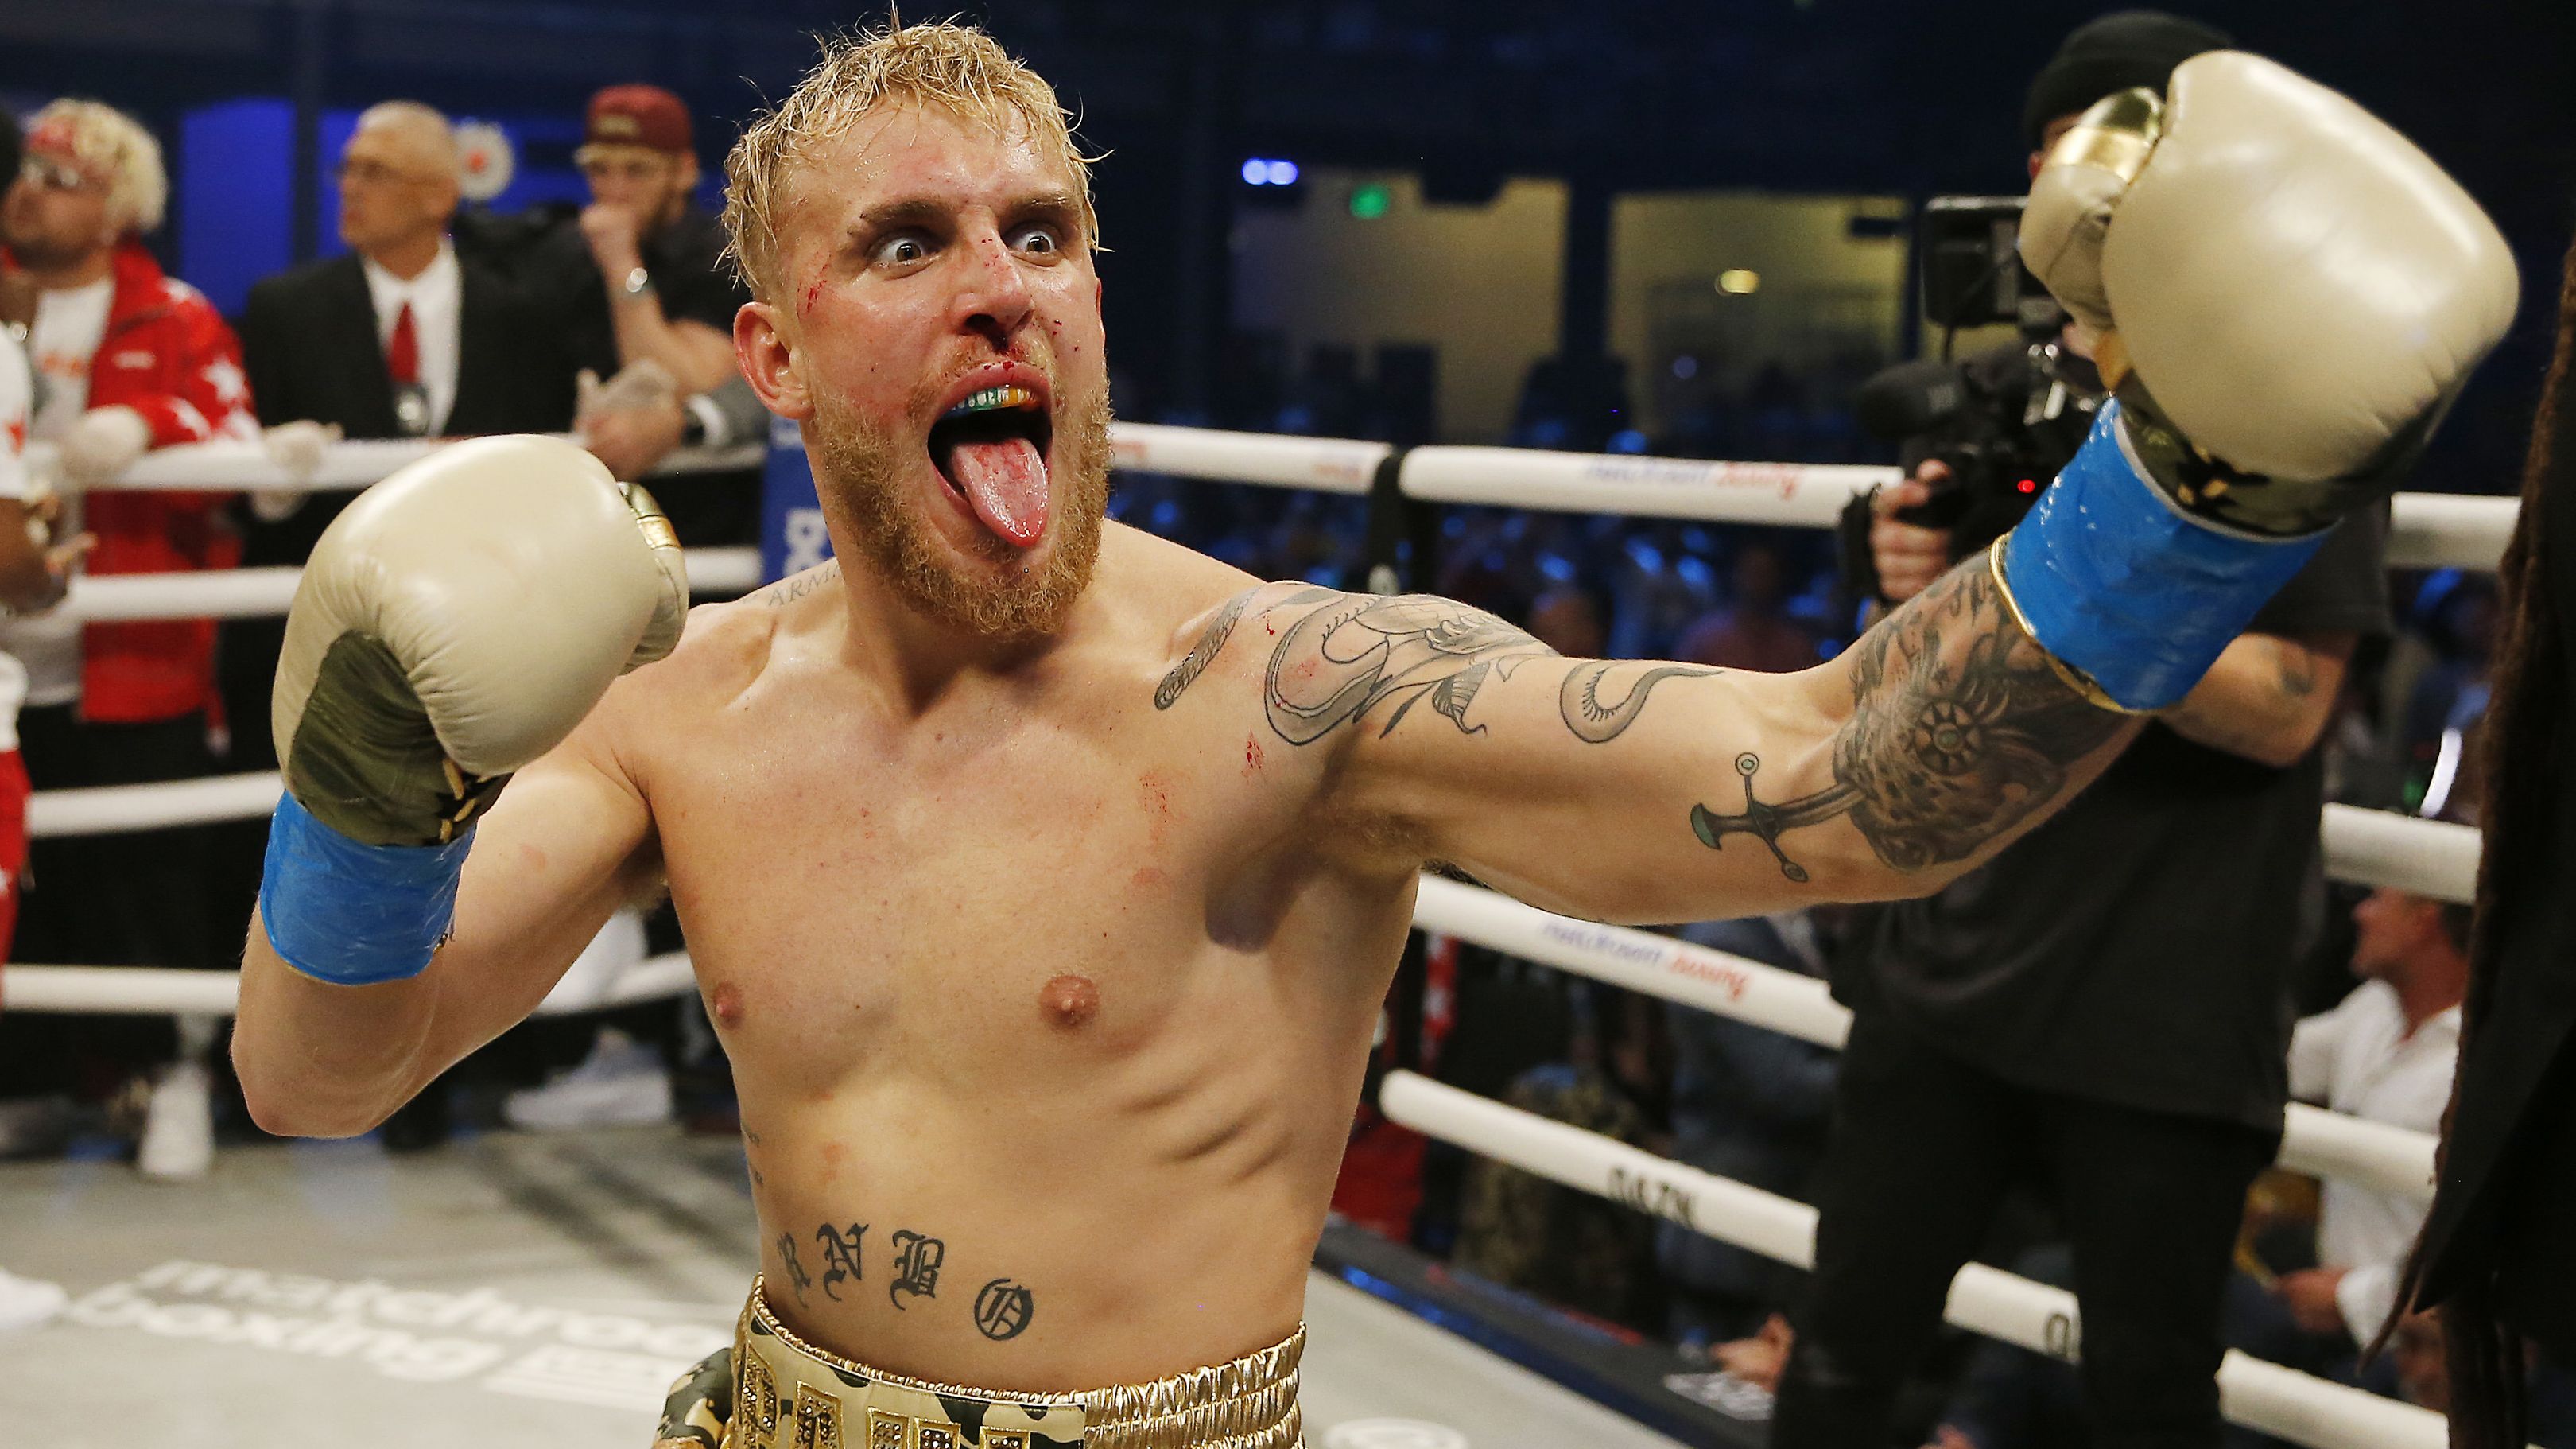 Jake Paul celebrates after defeating AnEsonGib in a first round knockout.